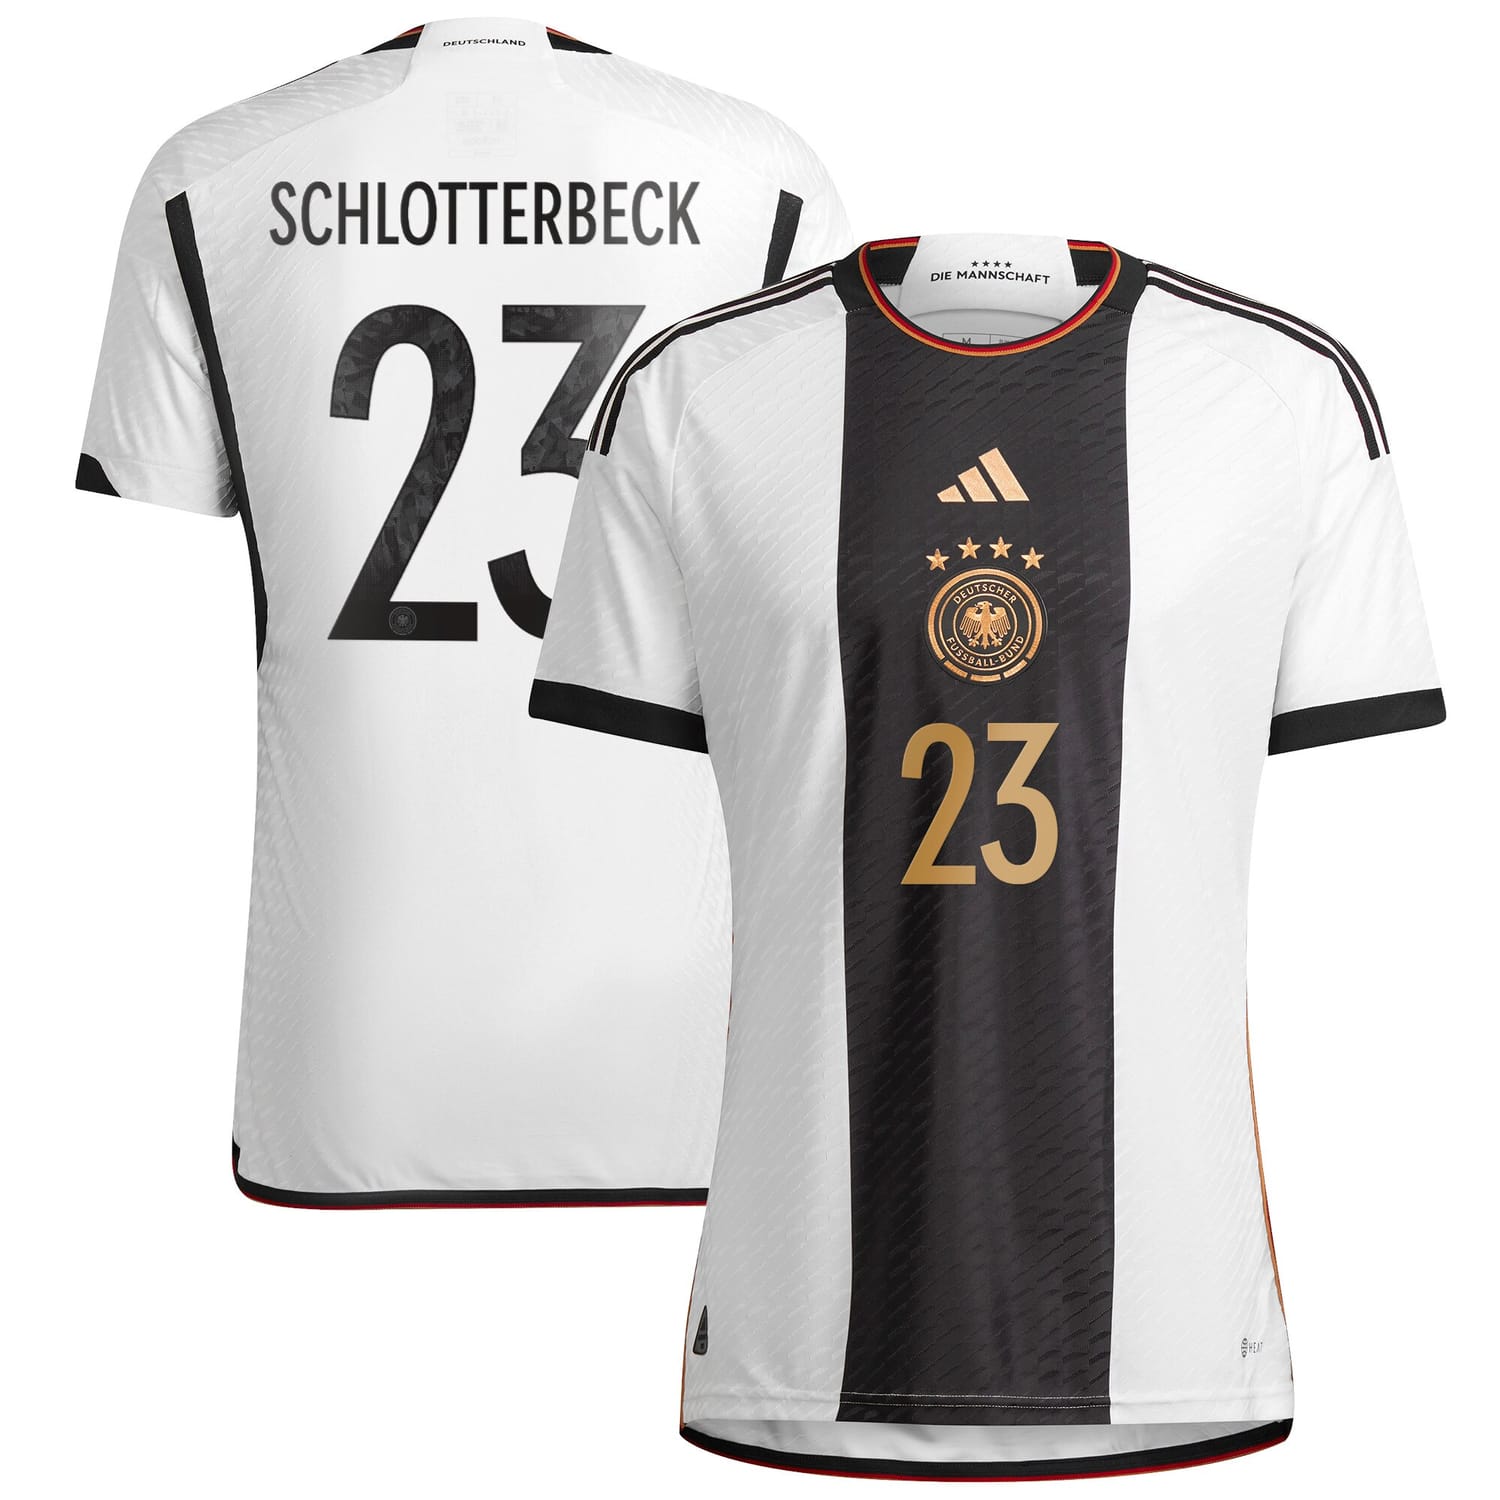 Germany National Team Home Authentic Jersey Shirt player Nico Schlotterbeck 23 printing for Men